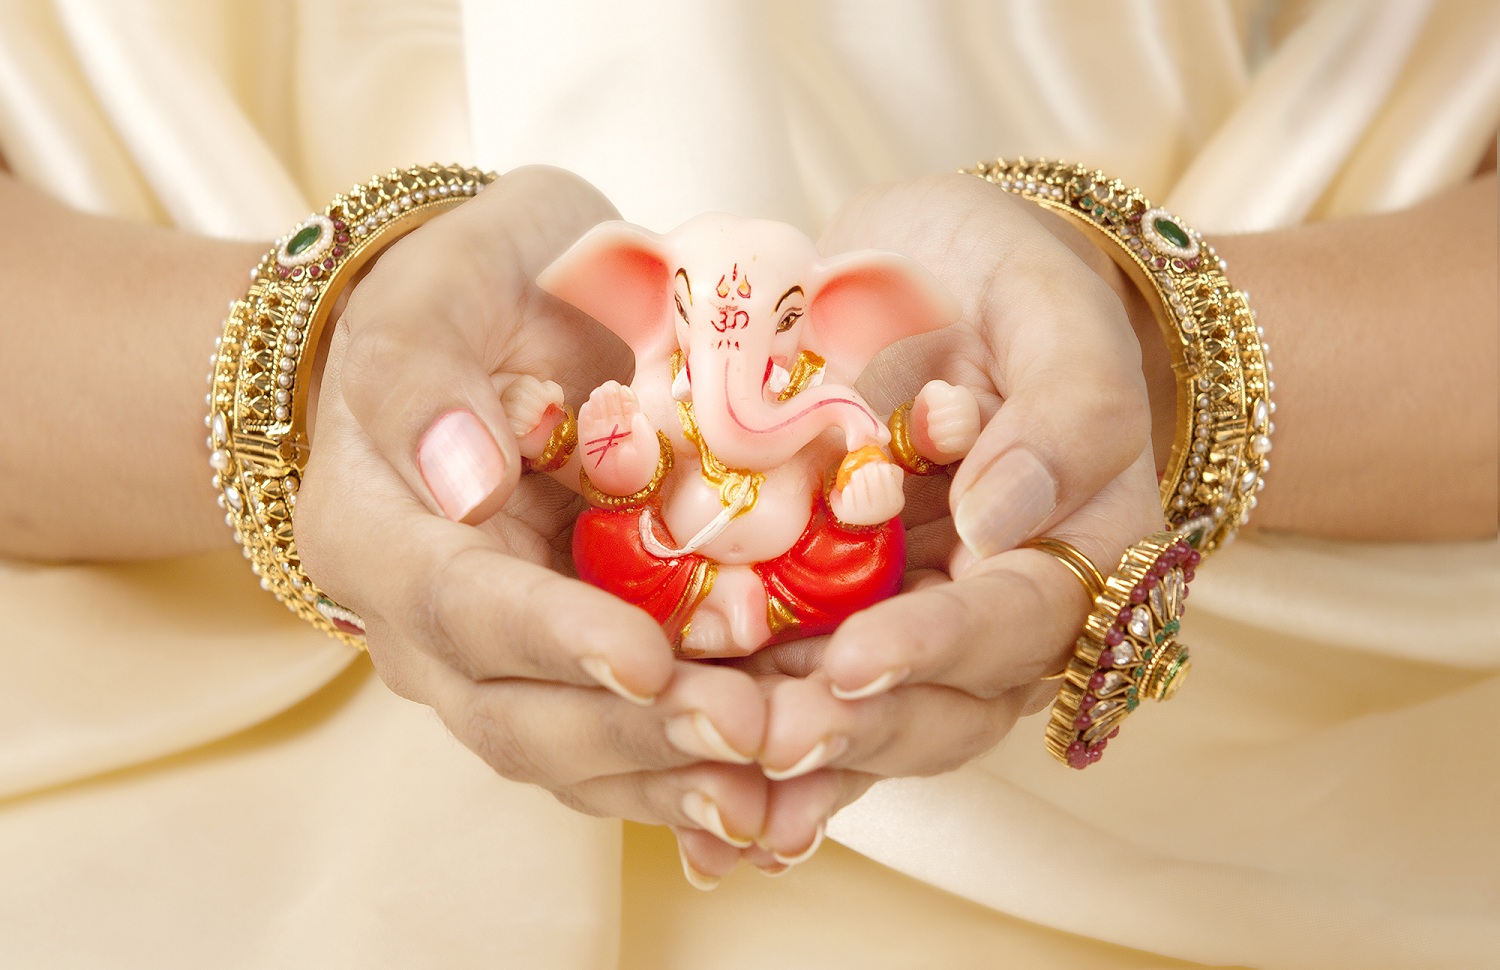 Hd Happy Ganesh Chaturthi Images, Photos, Wallpapers, - Ganpati Images For Dp , HD Wallpaper & Backgrounds